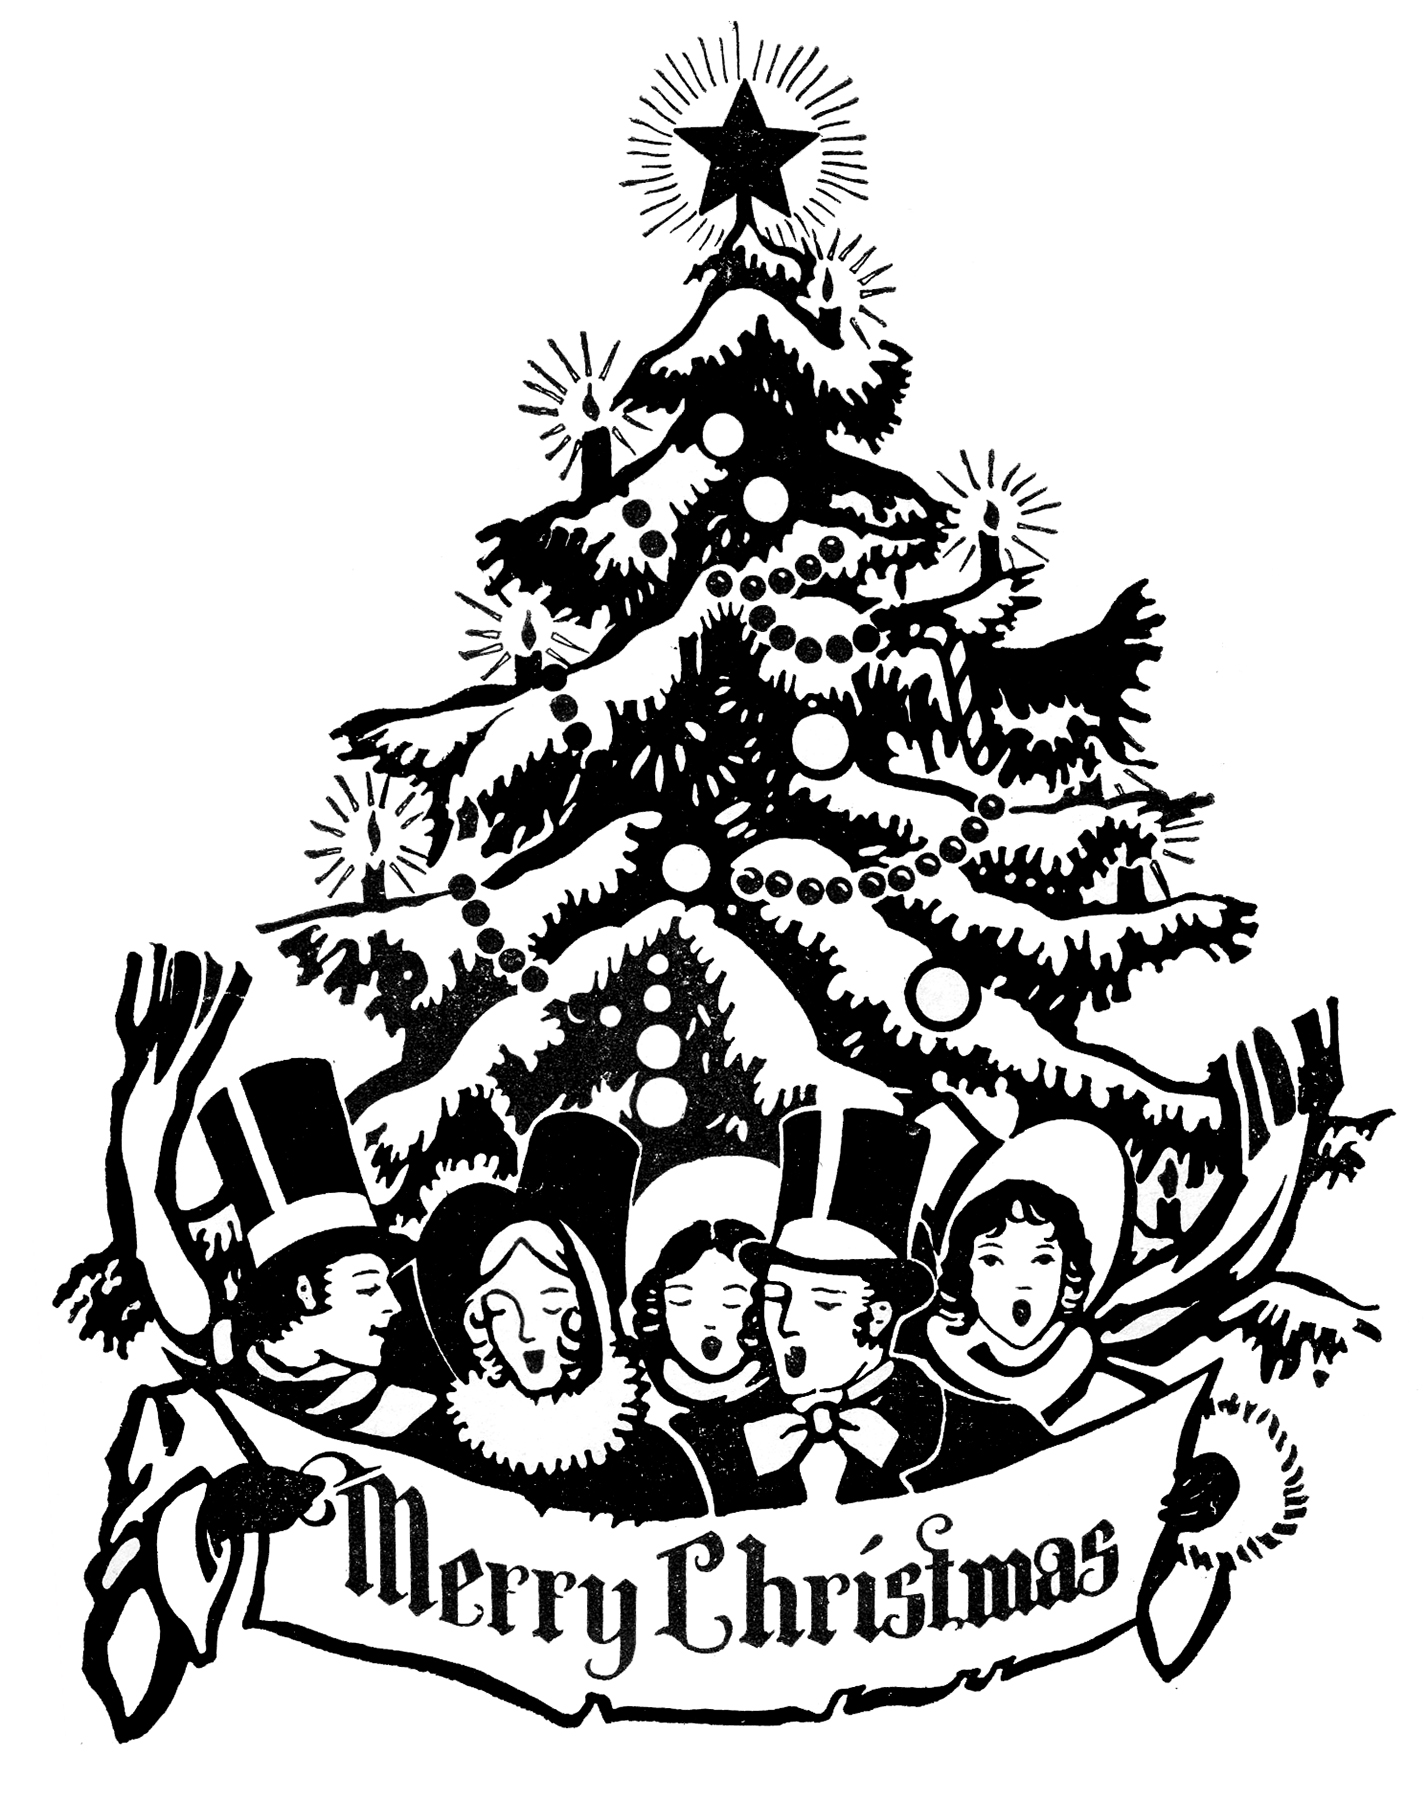 Christmas clipart black and white - extremelat